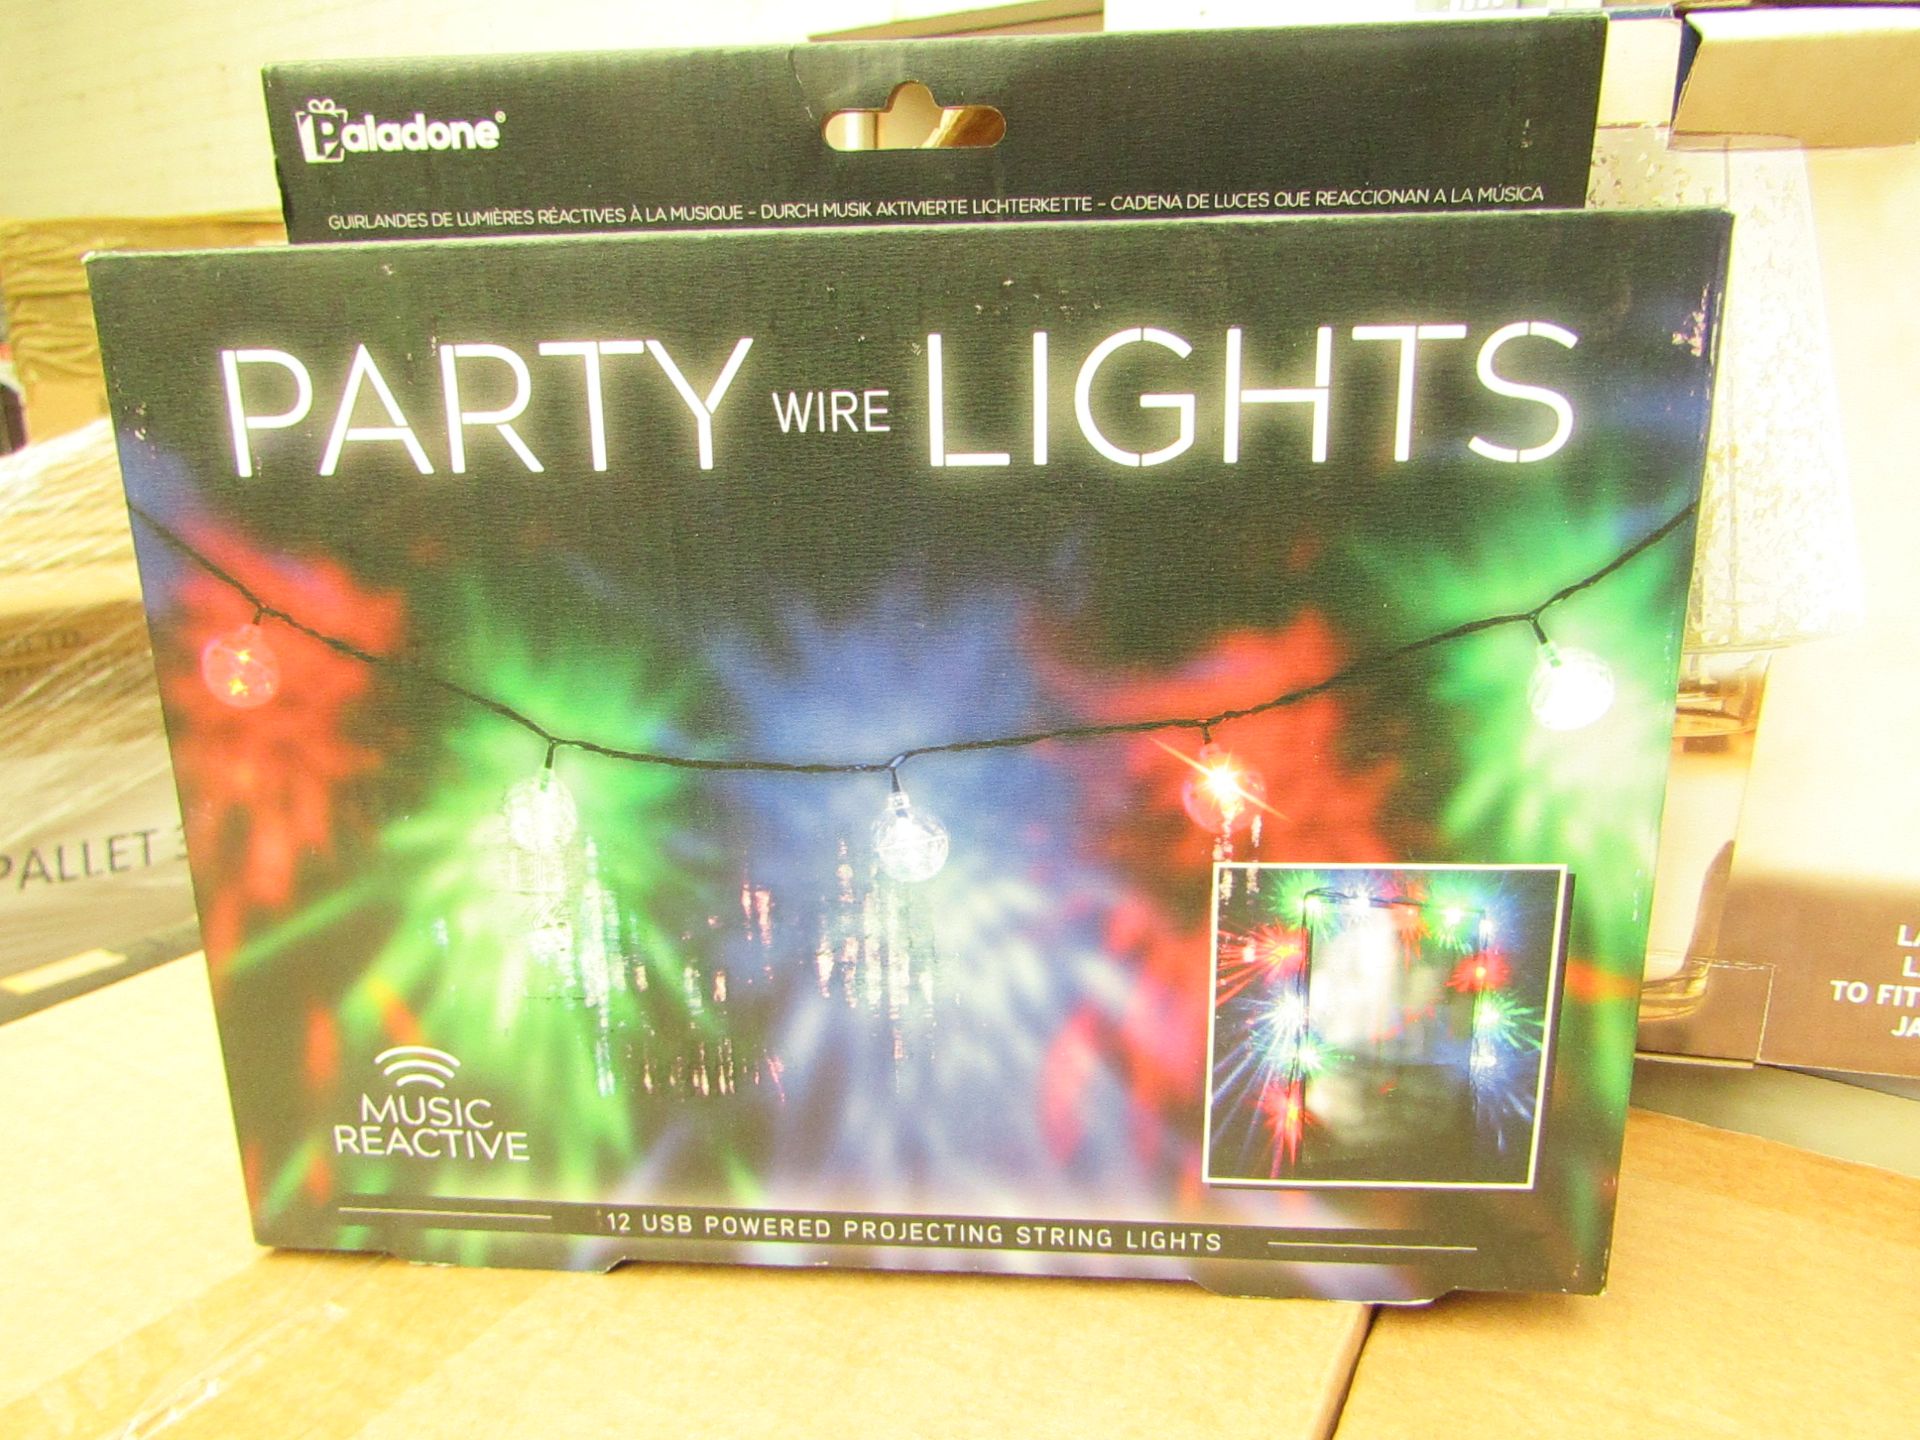 2x Paladone Part string lights, they react to the music beat to form different light displays, new